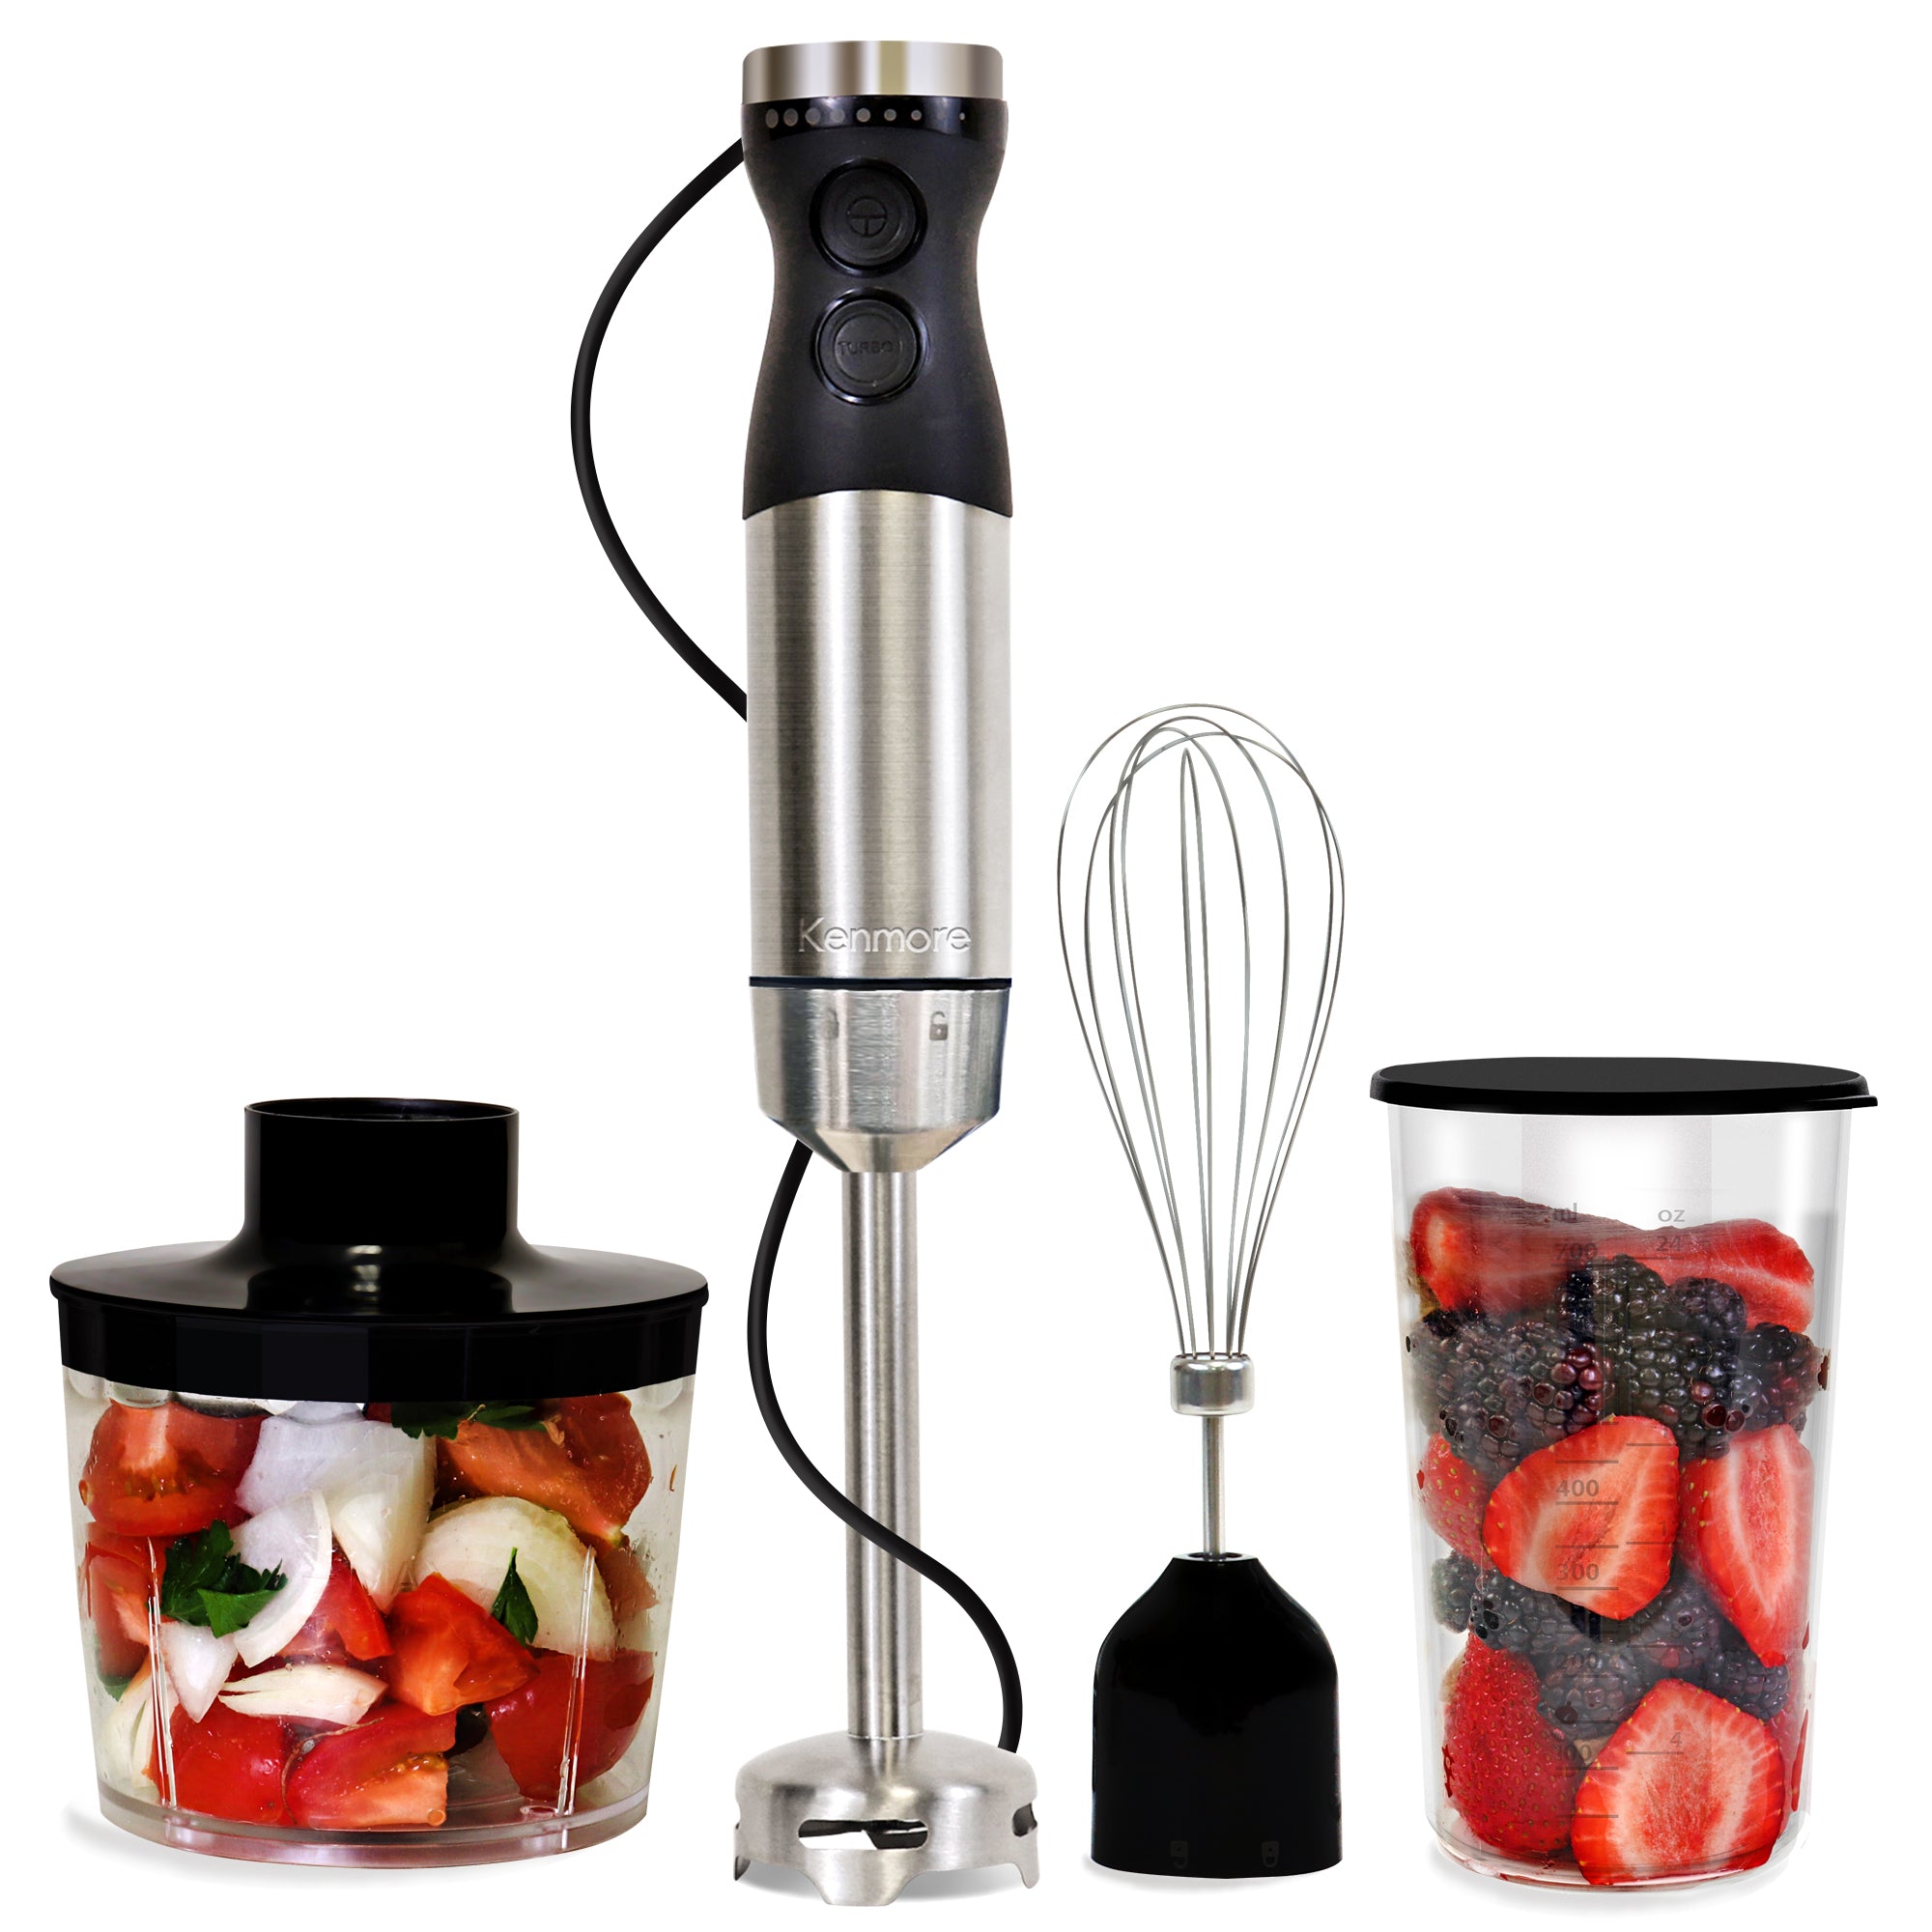 Kenmore stainless steel hand blender with blending stick attached and food chopper filled with salsa ingredients, whisk attachment, and beaker filled with berries arranged around it on a white background